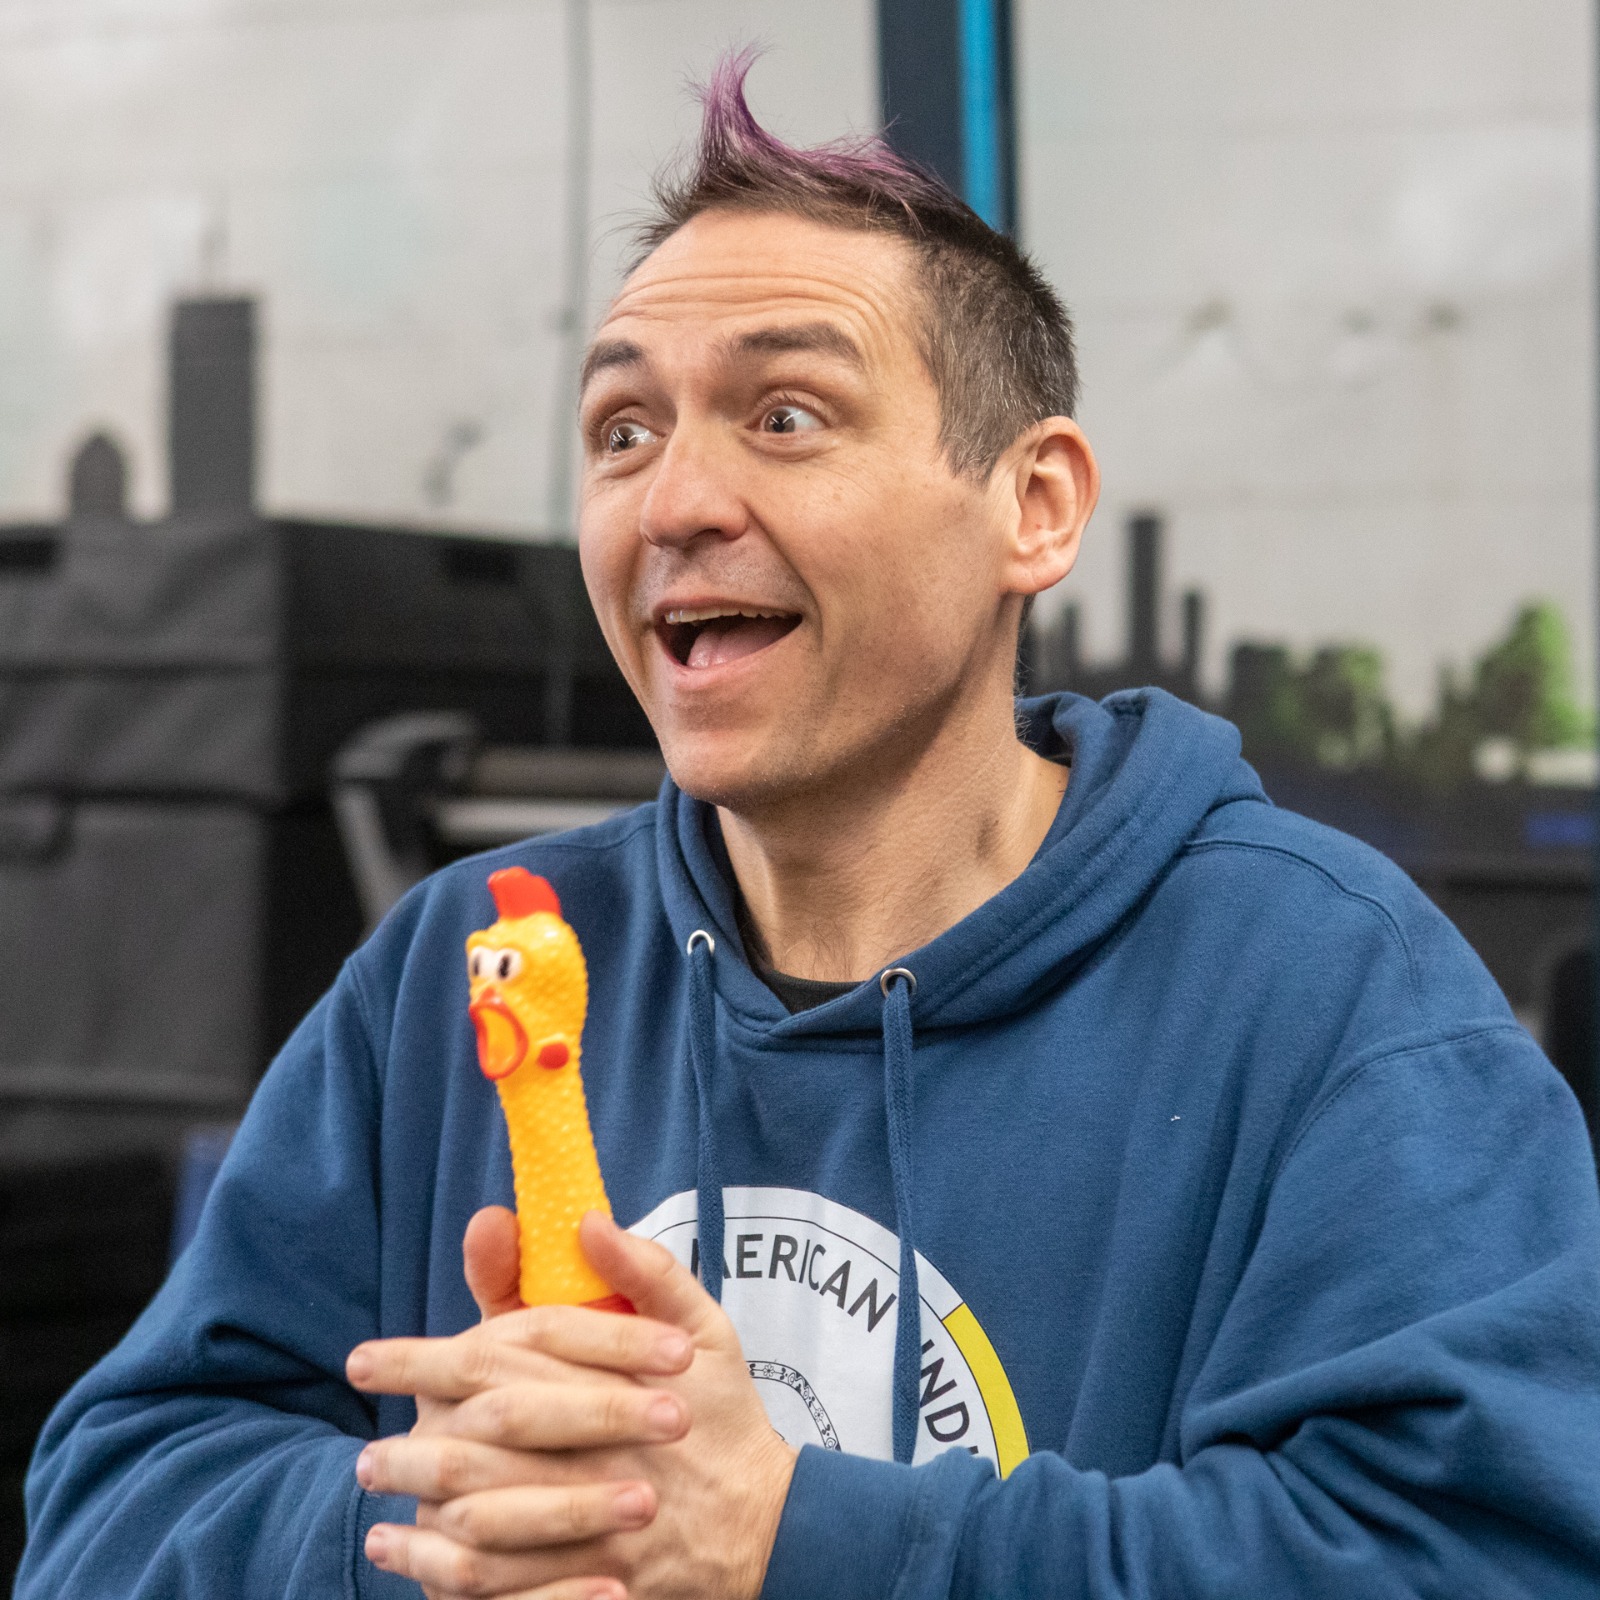 JT, making the same face as a rubber chicken